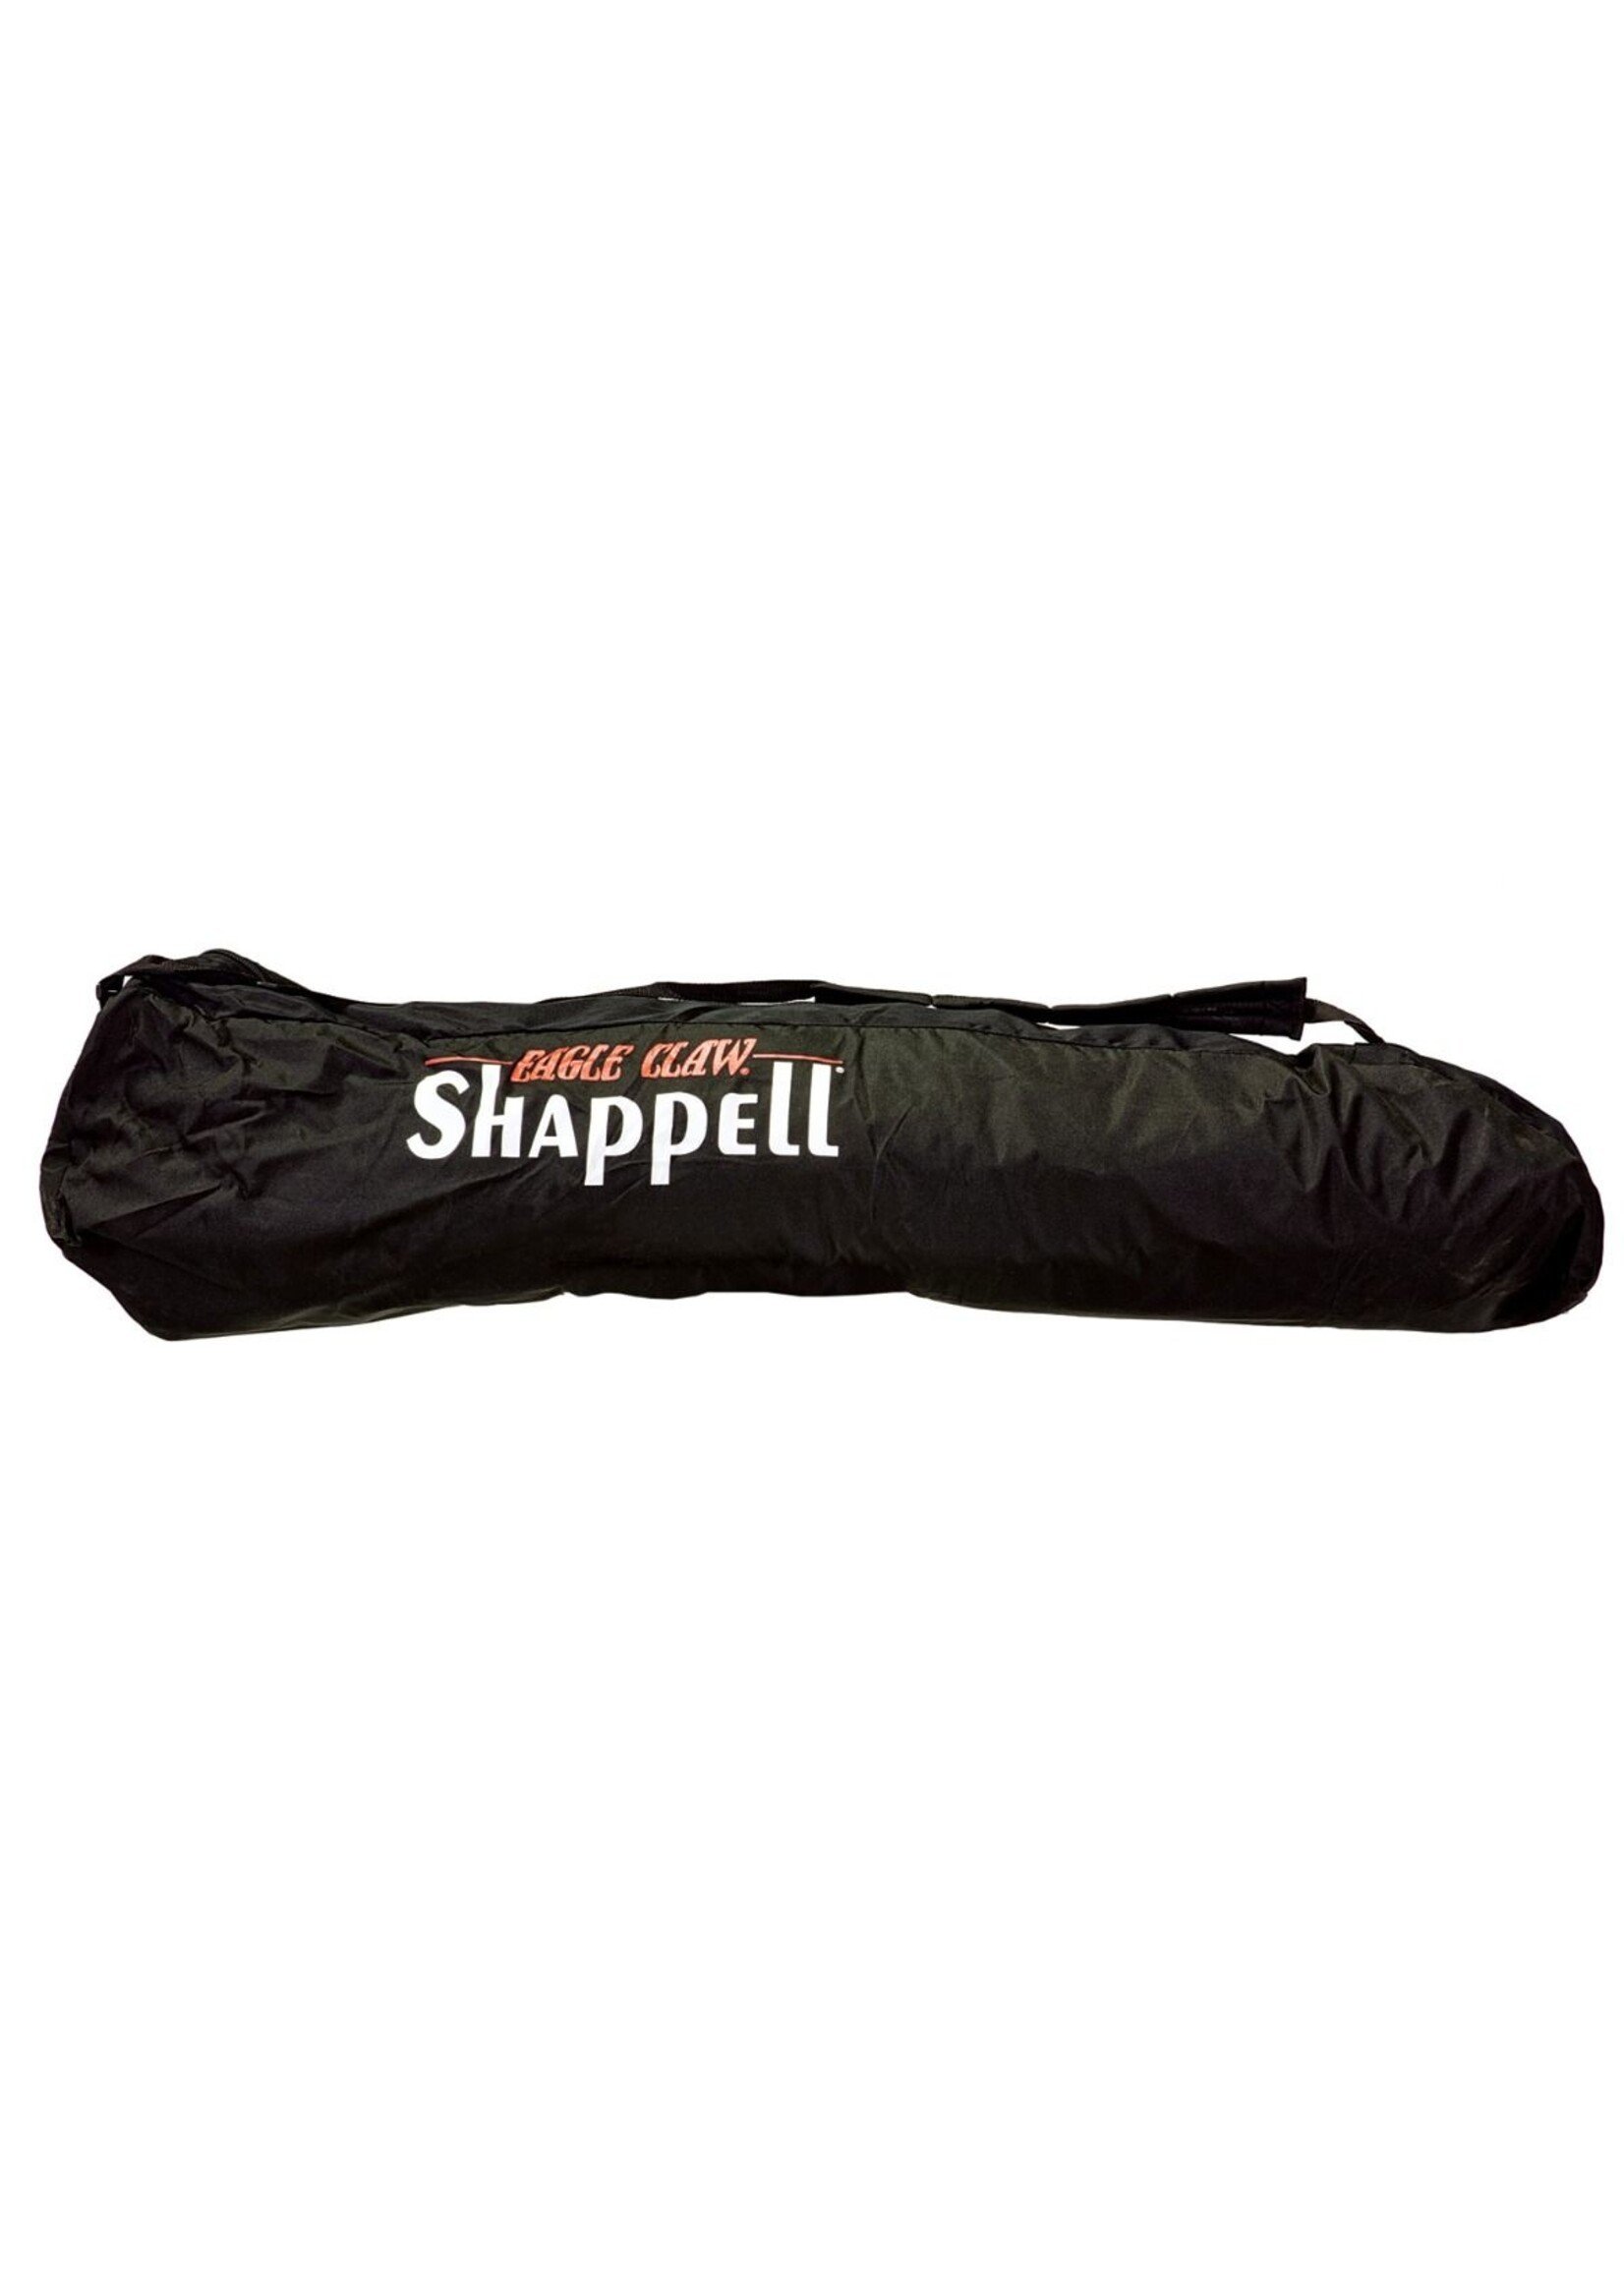 Shappell Shappell Wide House 5500 Insulated Ice Fishing Shelter